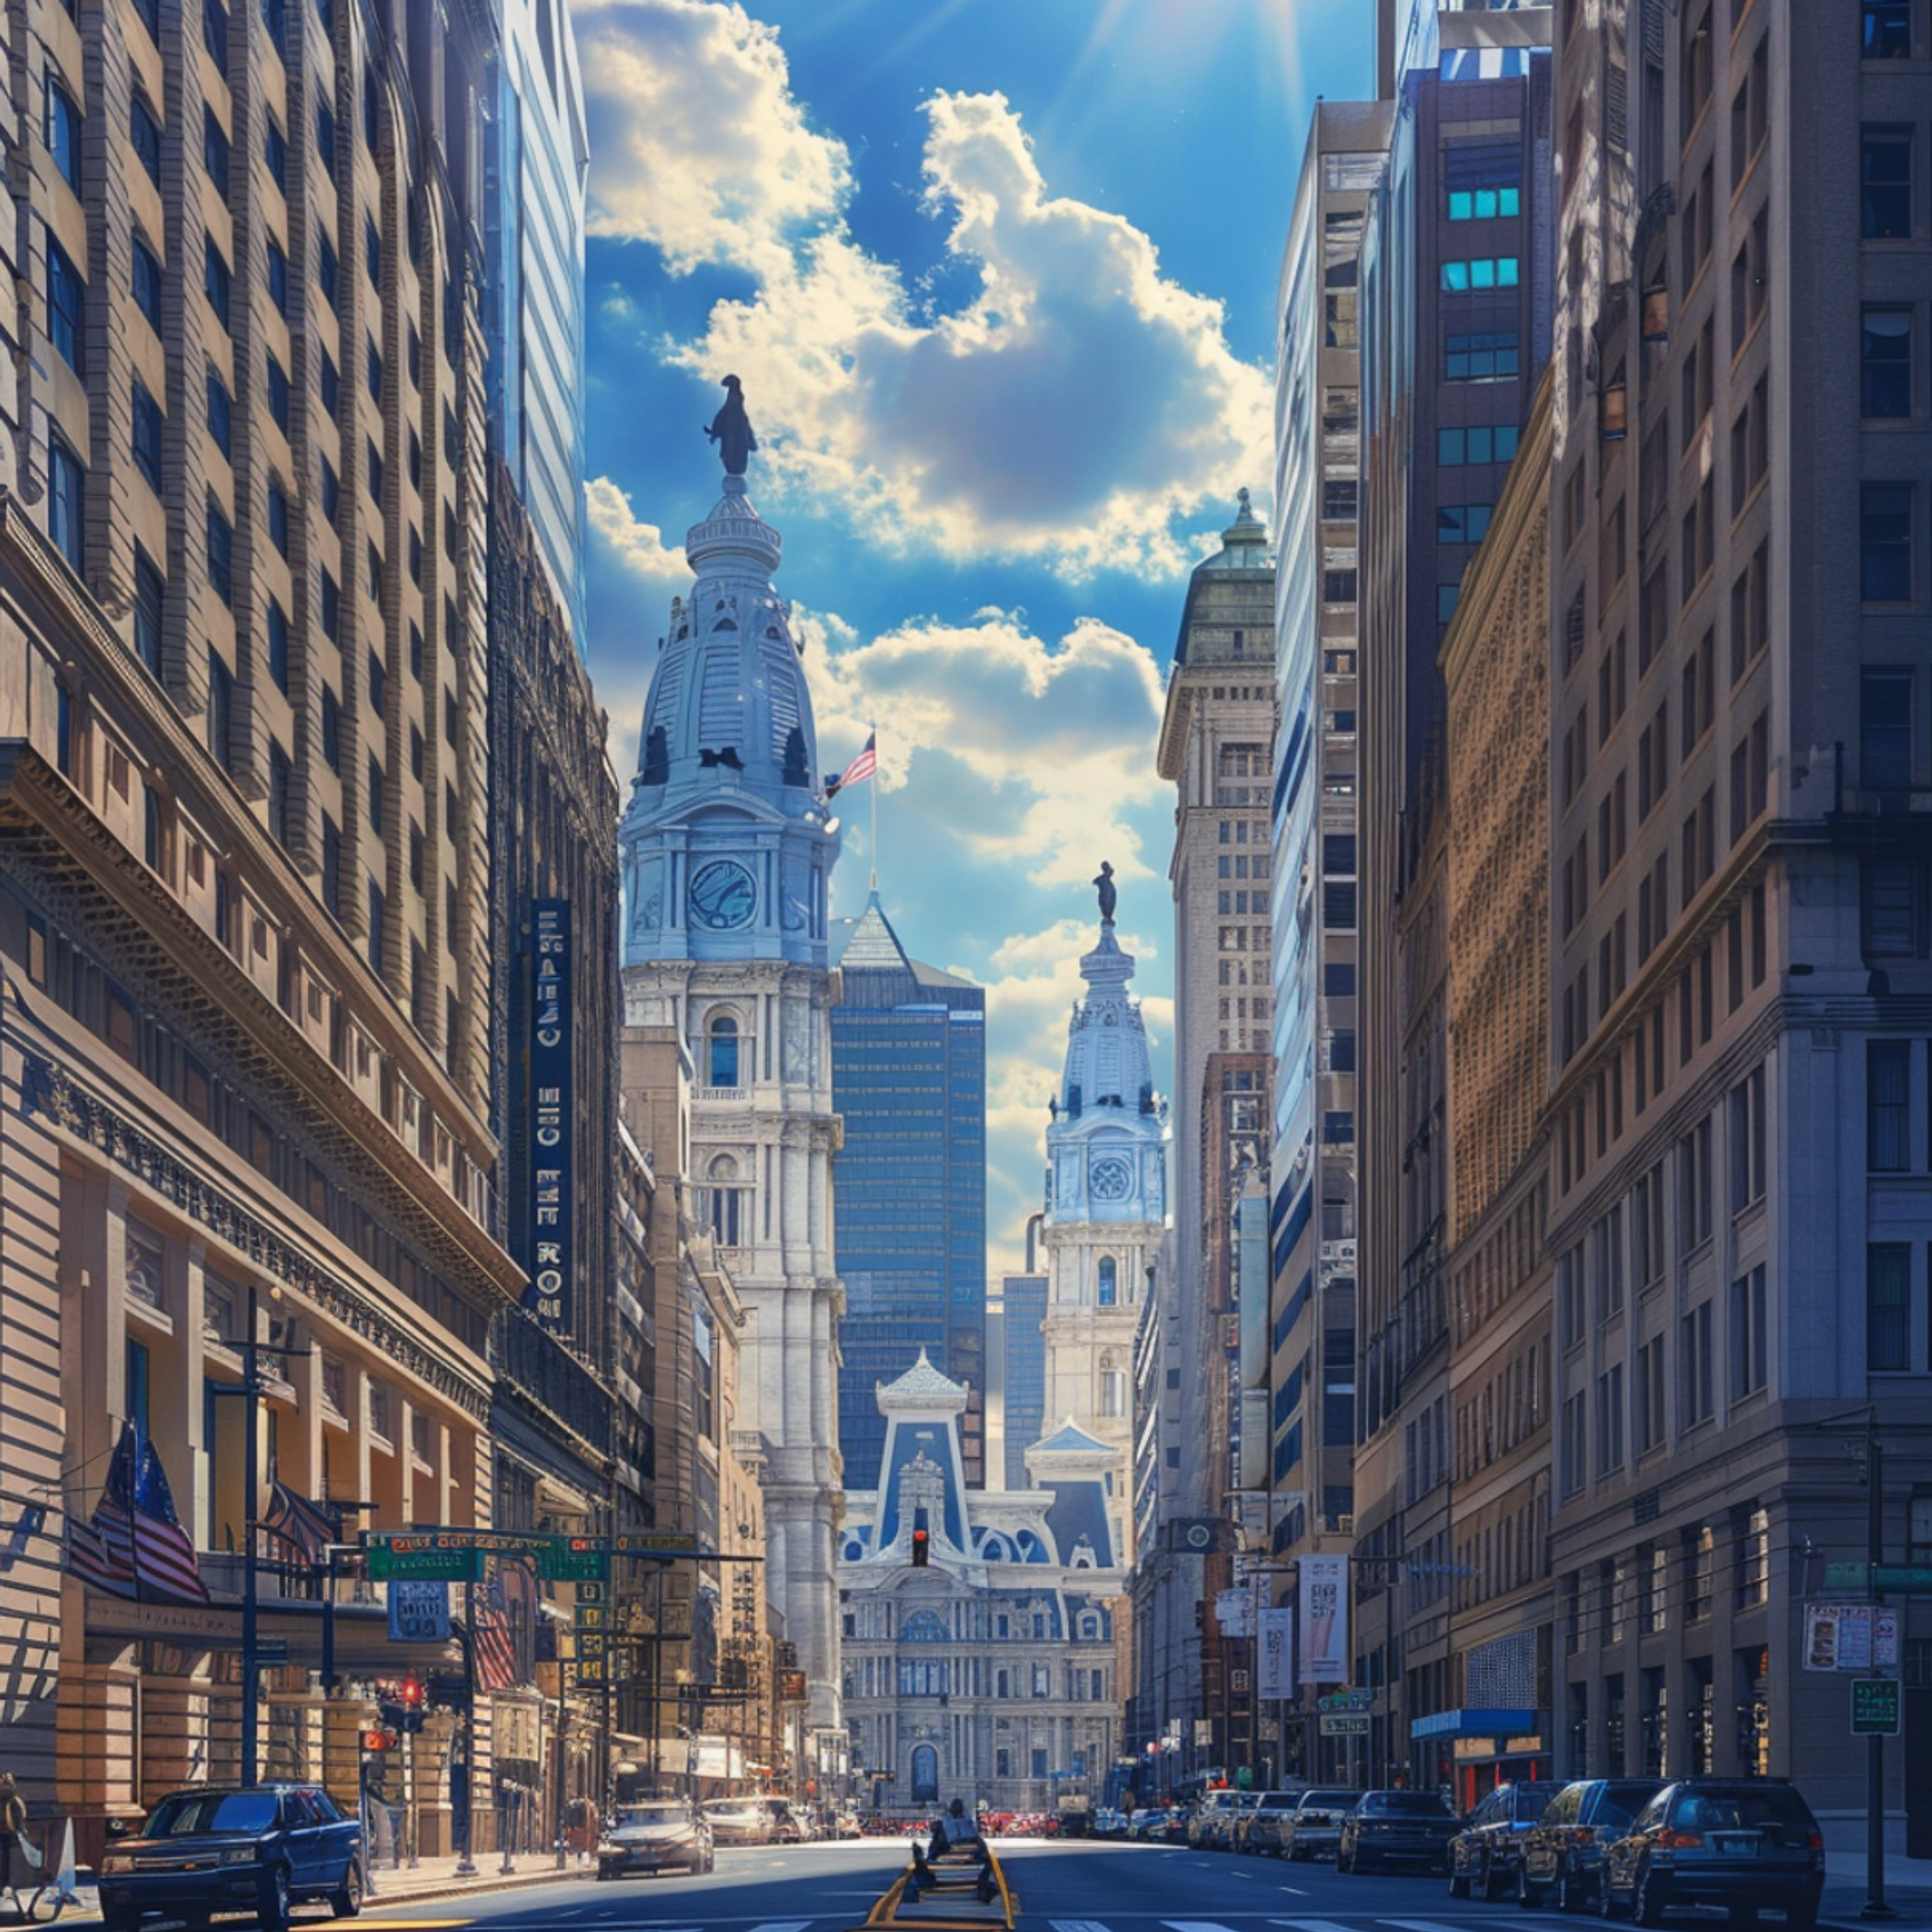 Sunlight beams down onto the iconic City Hall with the statue of William Penn on top, as viewed from a bustling street in the heart of Philadelphia, depicting the city's vibrant urban landscape.